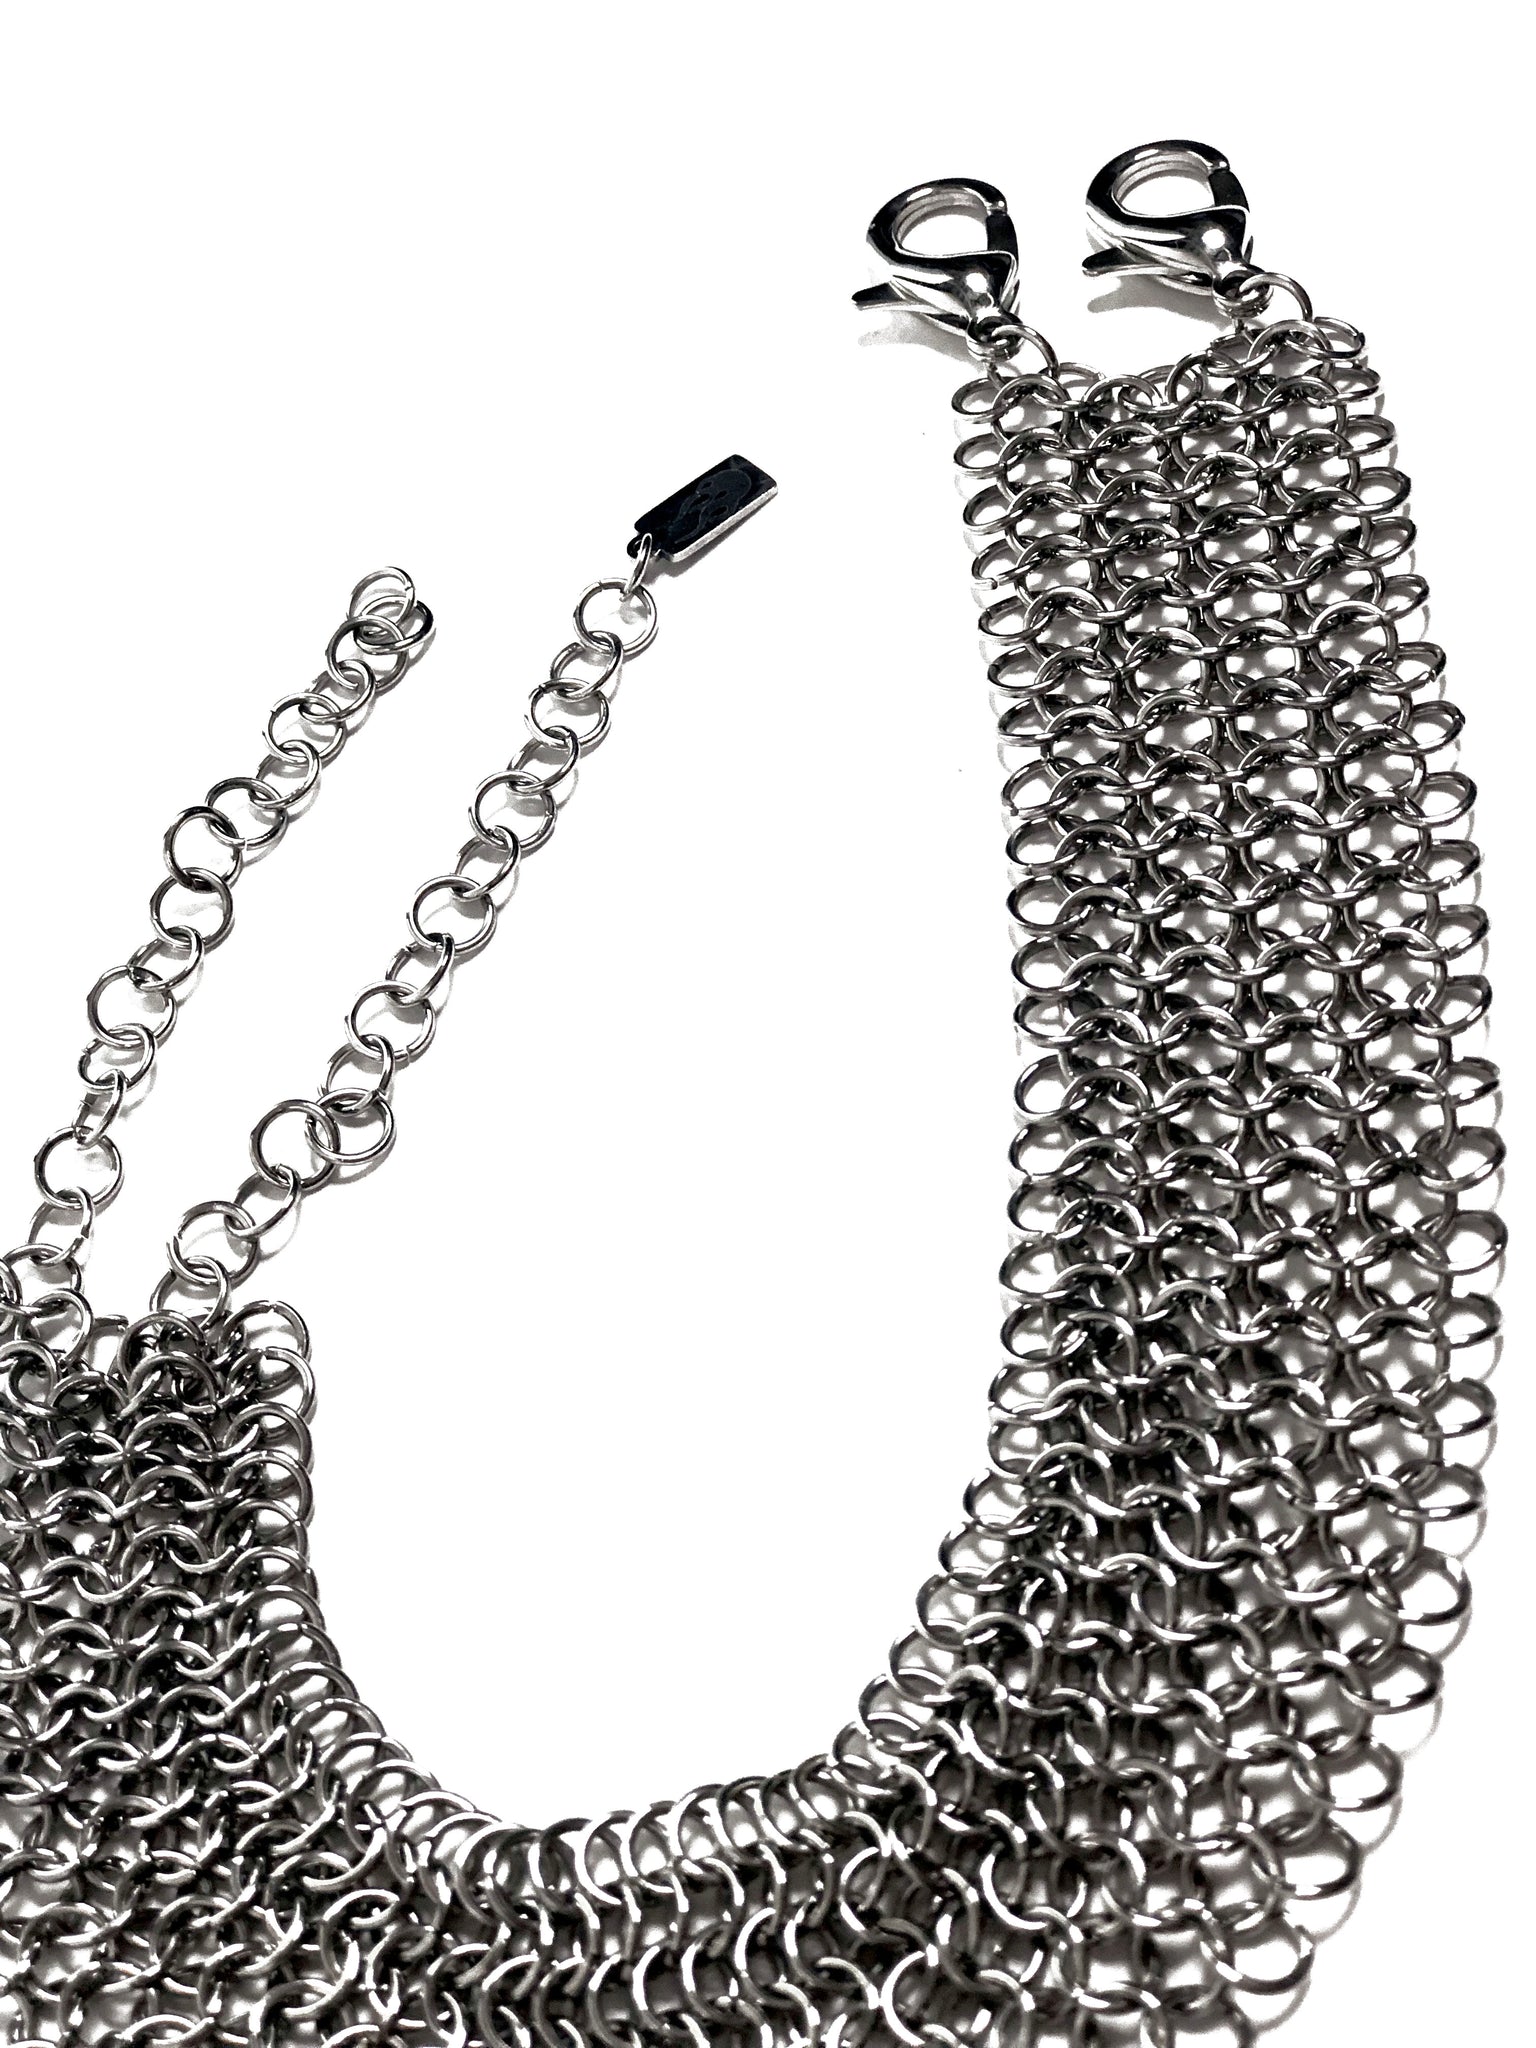 handmade stainless steel chainmaille choker made in Detroit MI by oringal designer SKNDLSS